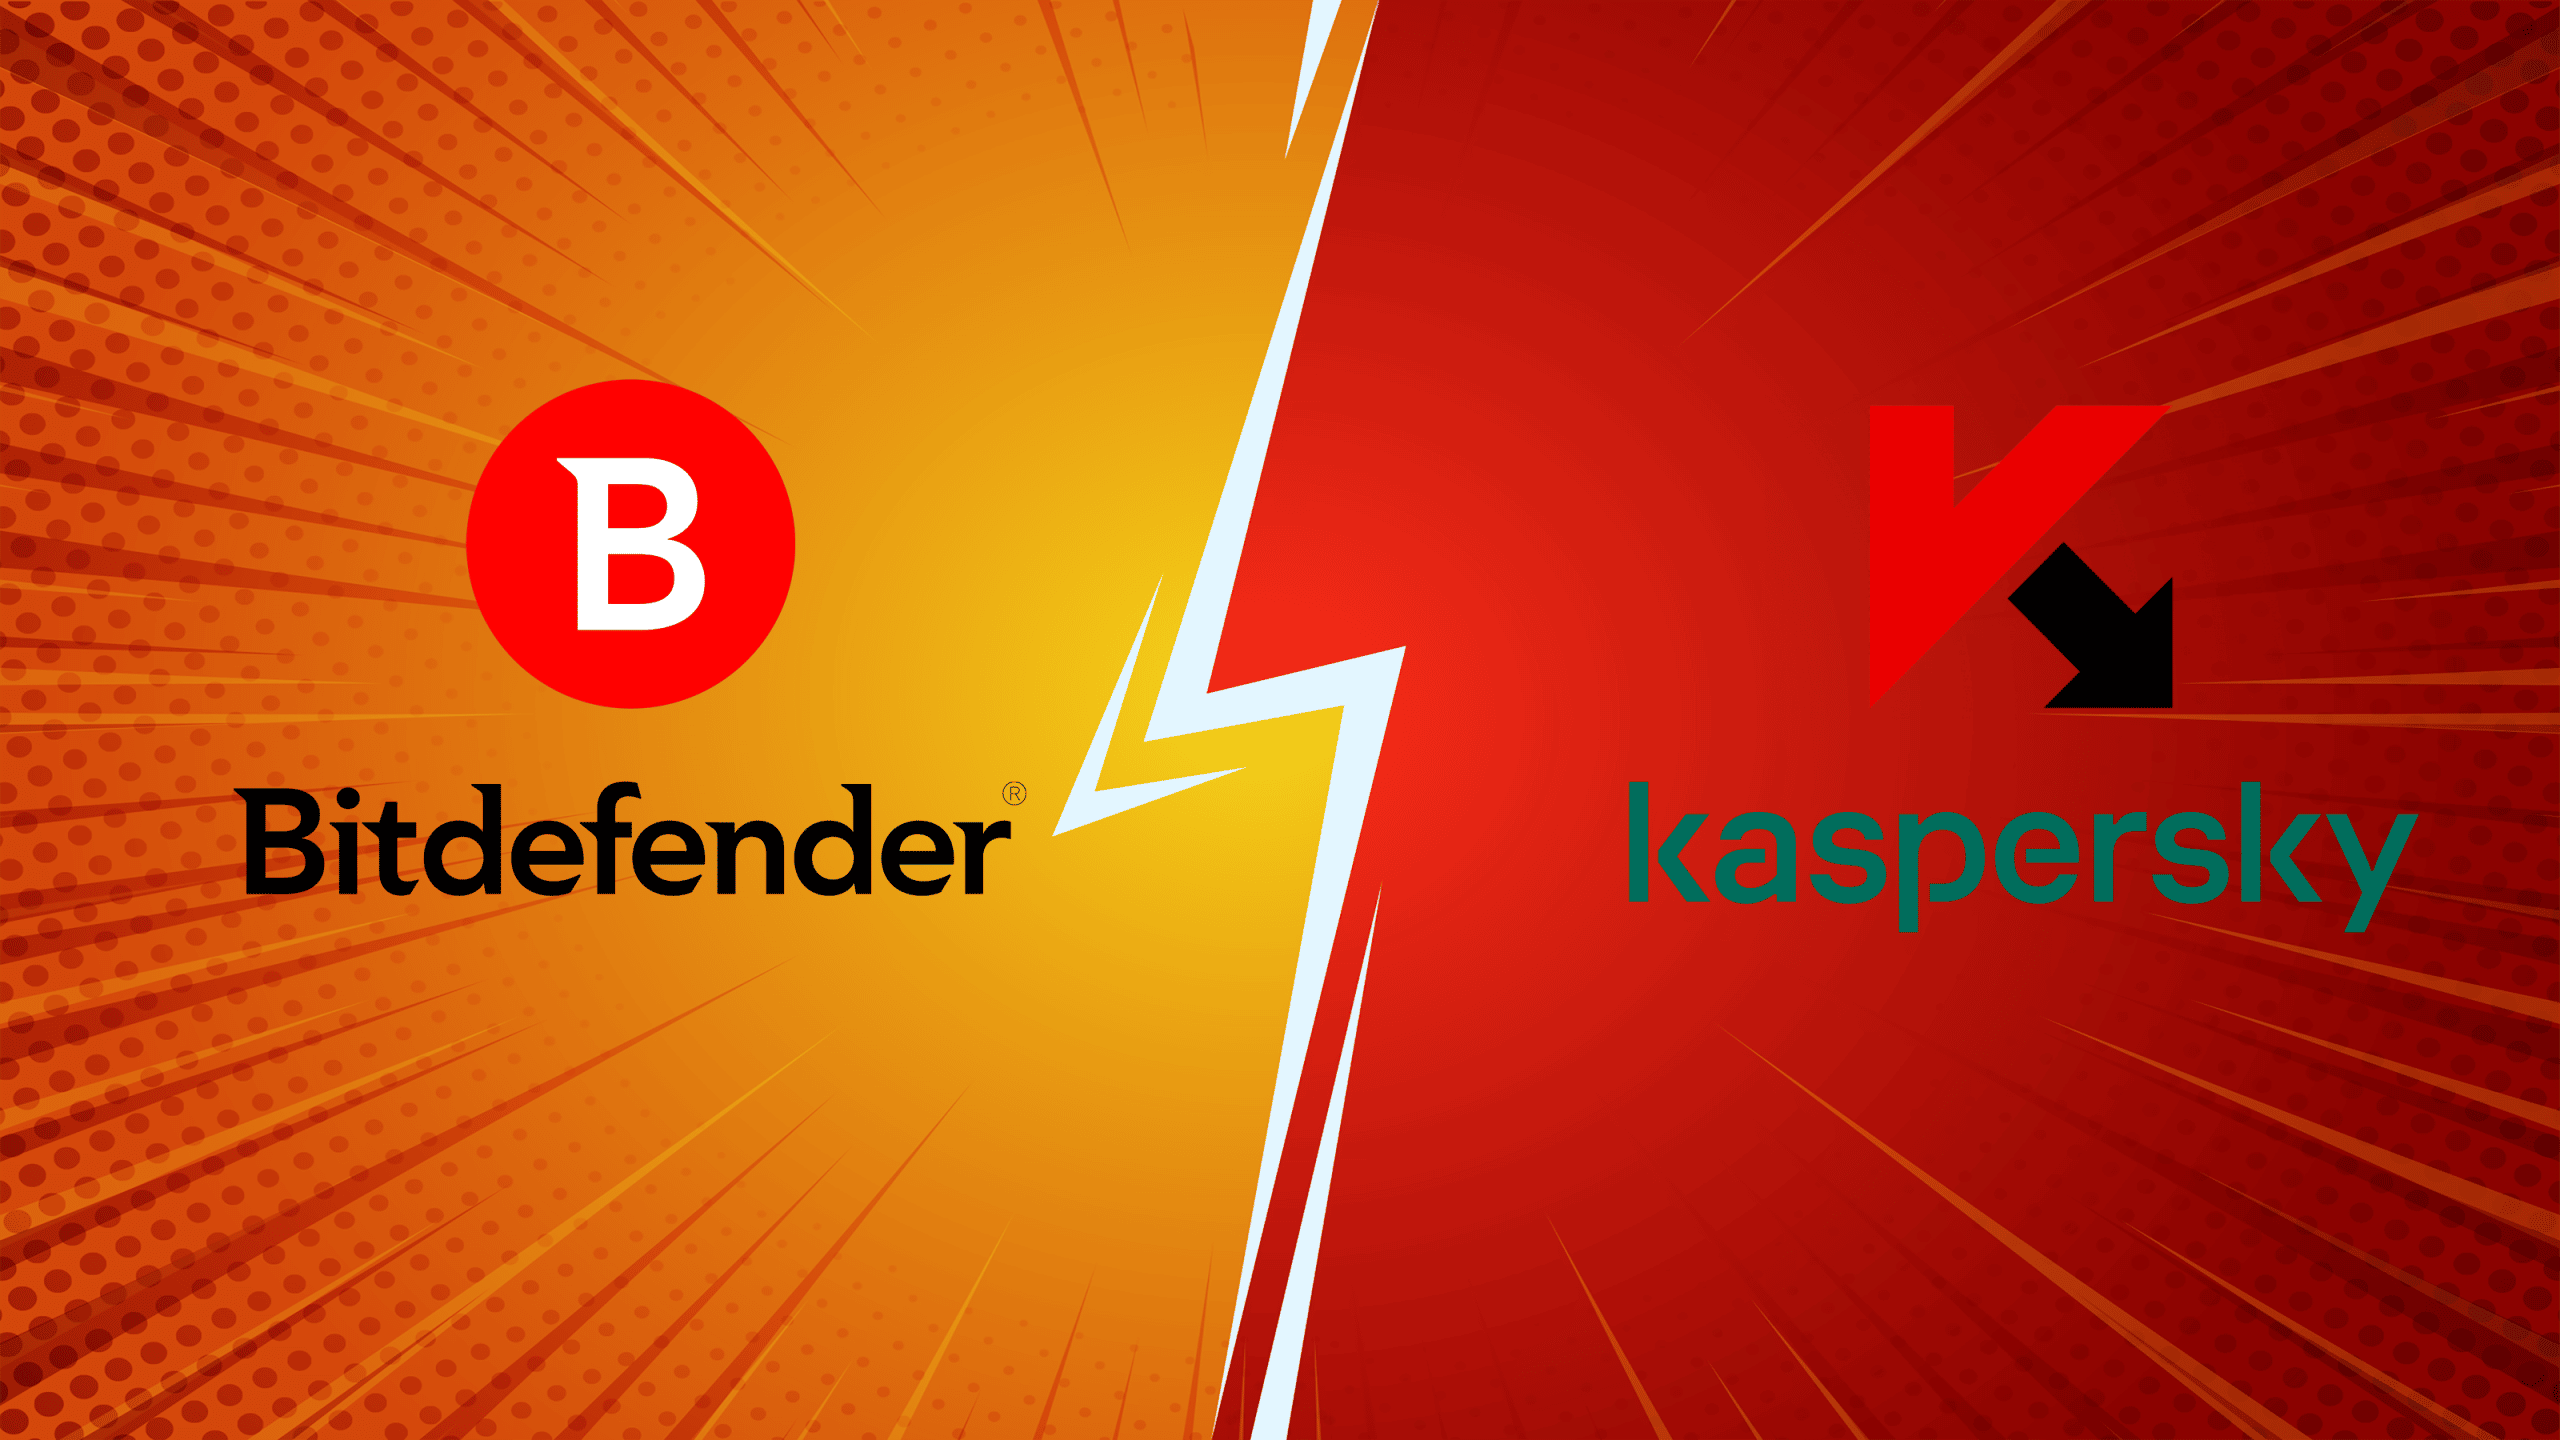 Bitdefender vs. Kaspersky Comparison Is a Classic One, With the Two Big Names of Security Software Constantly Trying to Outdo Each Other